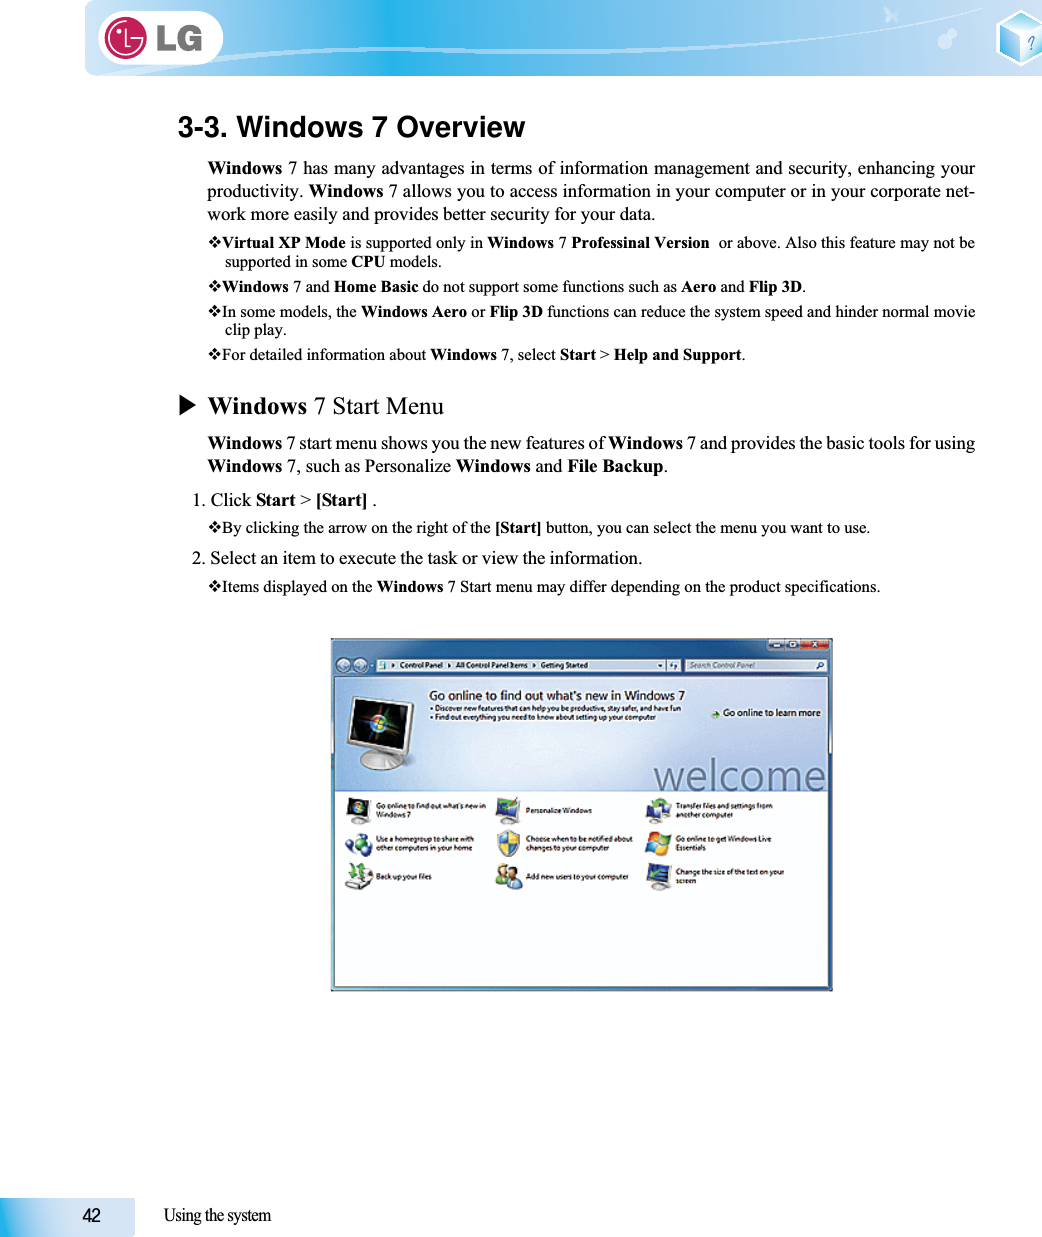 Using the system3-3. Windows 7 OverviewWindows 7 has many advantages in terms of information management and security, enhancing yourproductivity. Windows 7 allows you to access information in your computer or in your corporate net-work more easily and provides better security for your data.Virtual XP Mode is supported only in Windows 7 Professinal Version  or above. Also this feature may not besupported in some CPU models.Windows 7 and Home Basic do not support some functions such as Aero and Flip 3D.In some models, the Windows Aero or Flip 3D functions can reduce the system speed and hinder normal movieclip play.For detailed information about Windows 7, select Start &gt; Help and Support.XWindows 7 Start MenuWindows 7 start menu shows you the new features of Windows 7 and provides the basic tools for usingWindows 7, such as Personalize Windows and File Backup.1. Click Start &gt; [Start] .By clicking the arrow on the right of the [Start] button, you can select the menu you want to use.2. Select an item to execute the task or view the information. Items displayed on the Windows 7 Start menu may differ depending on the product specifications.